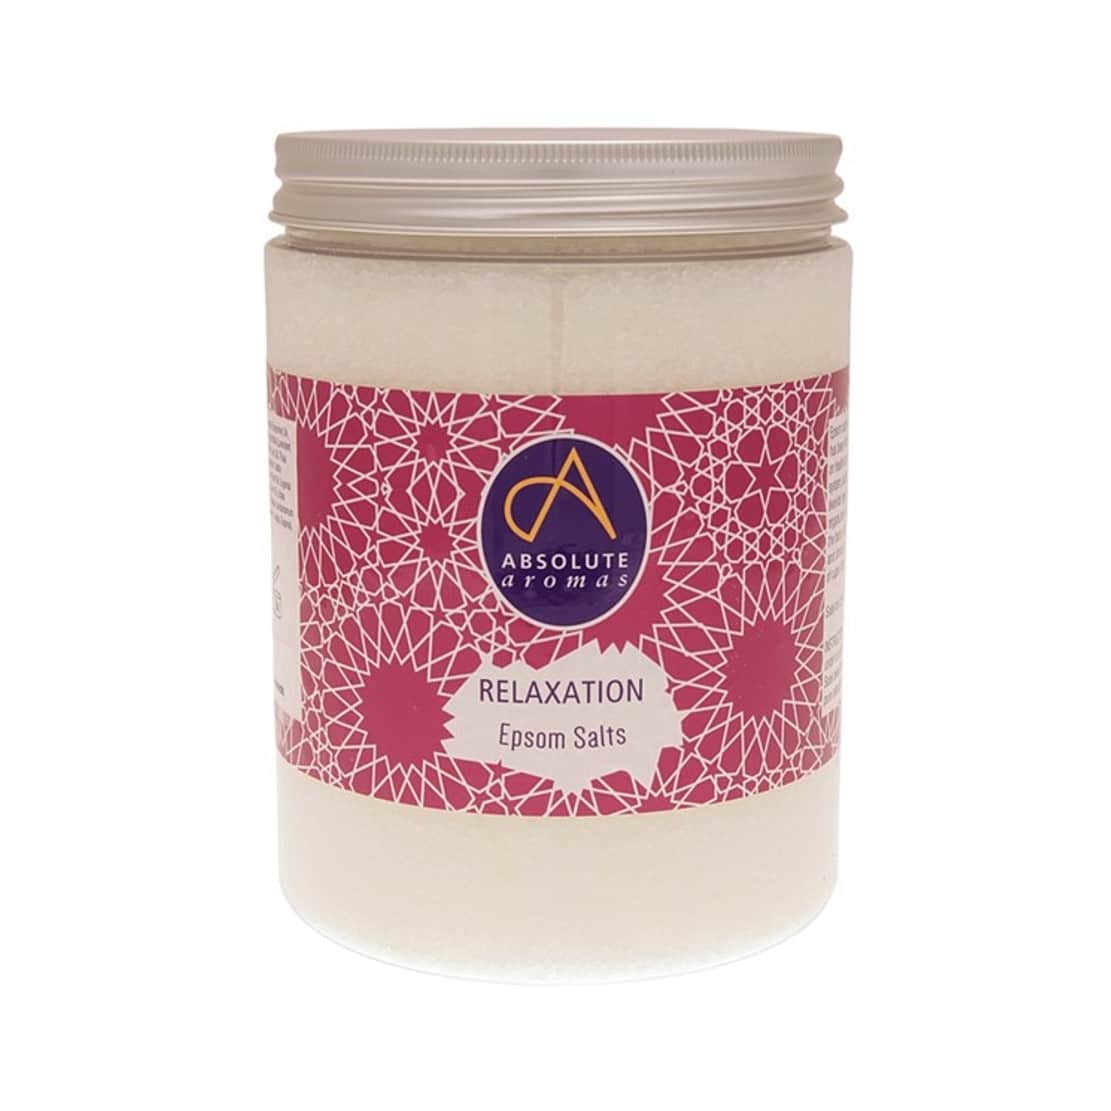 Absolute Aromas Epsom Salts (Relaxation) 575g